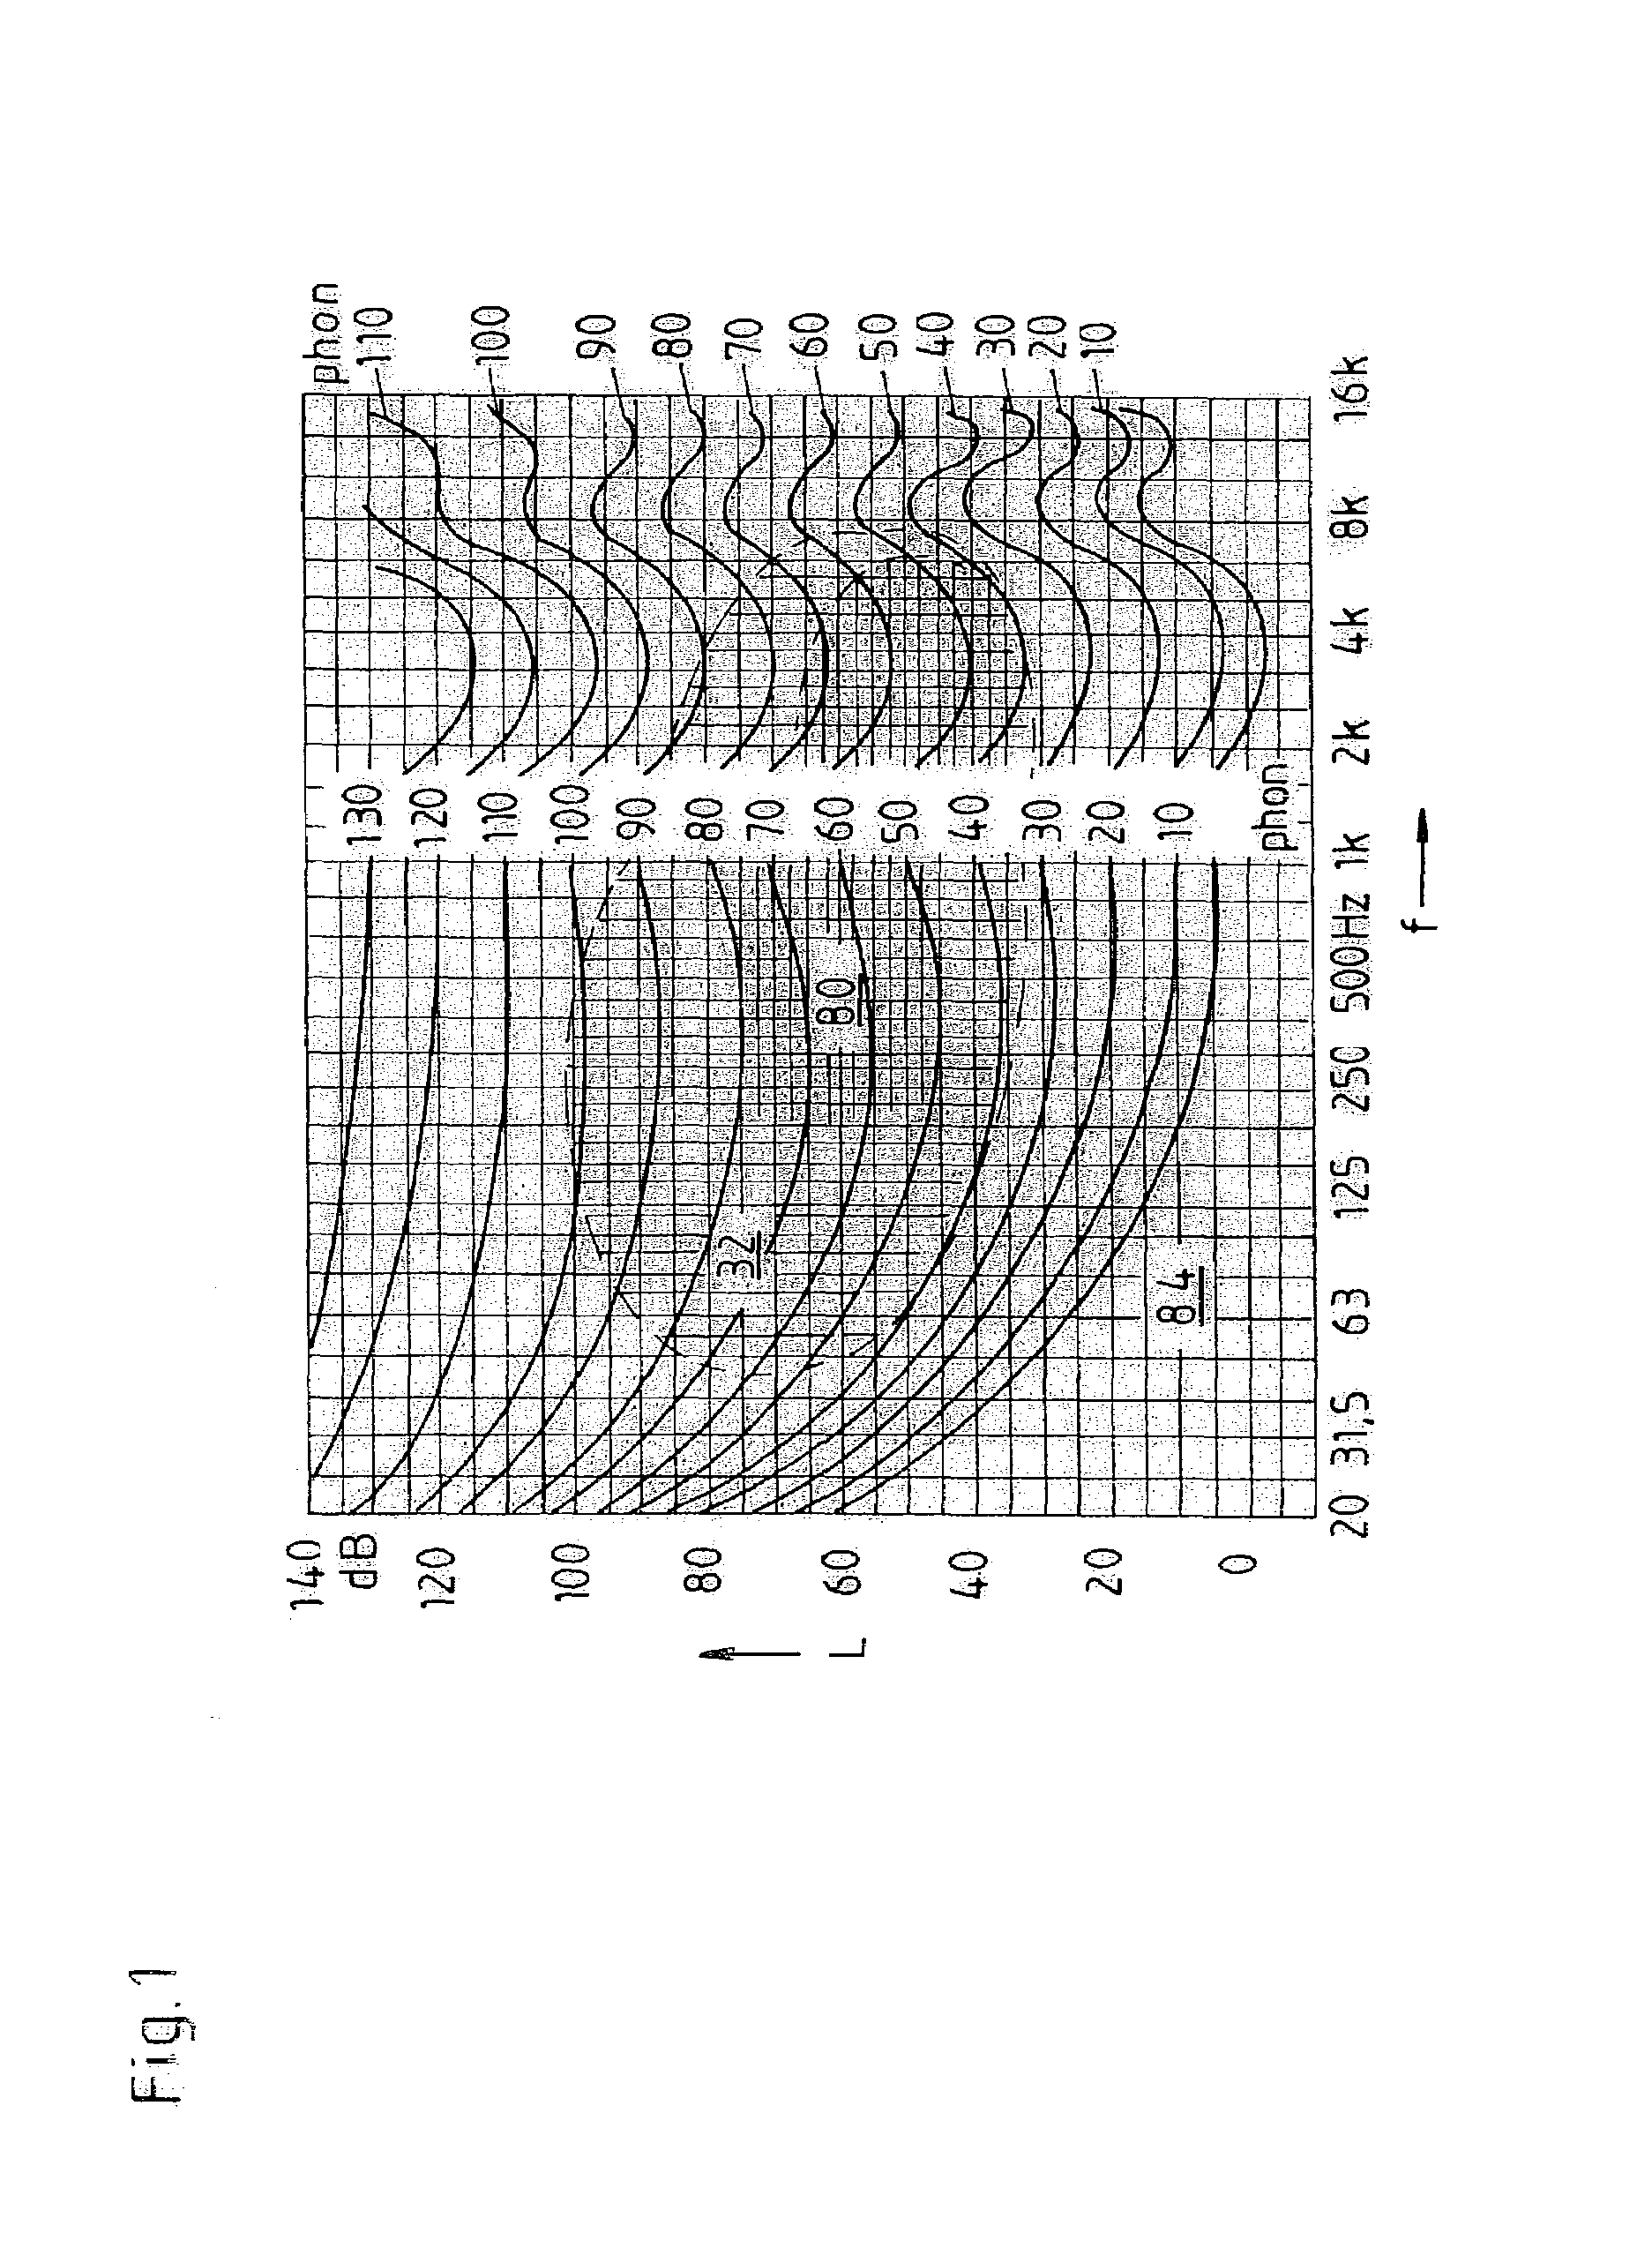 Method of adjusting filter parameters and an associated playback system